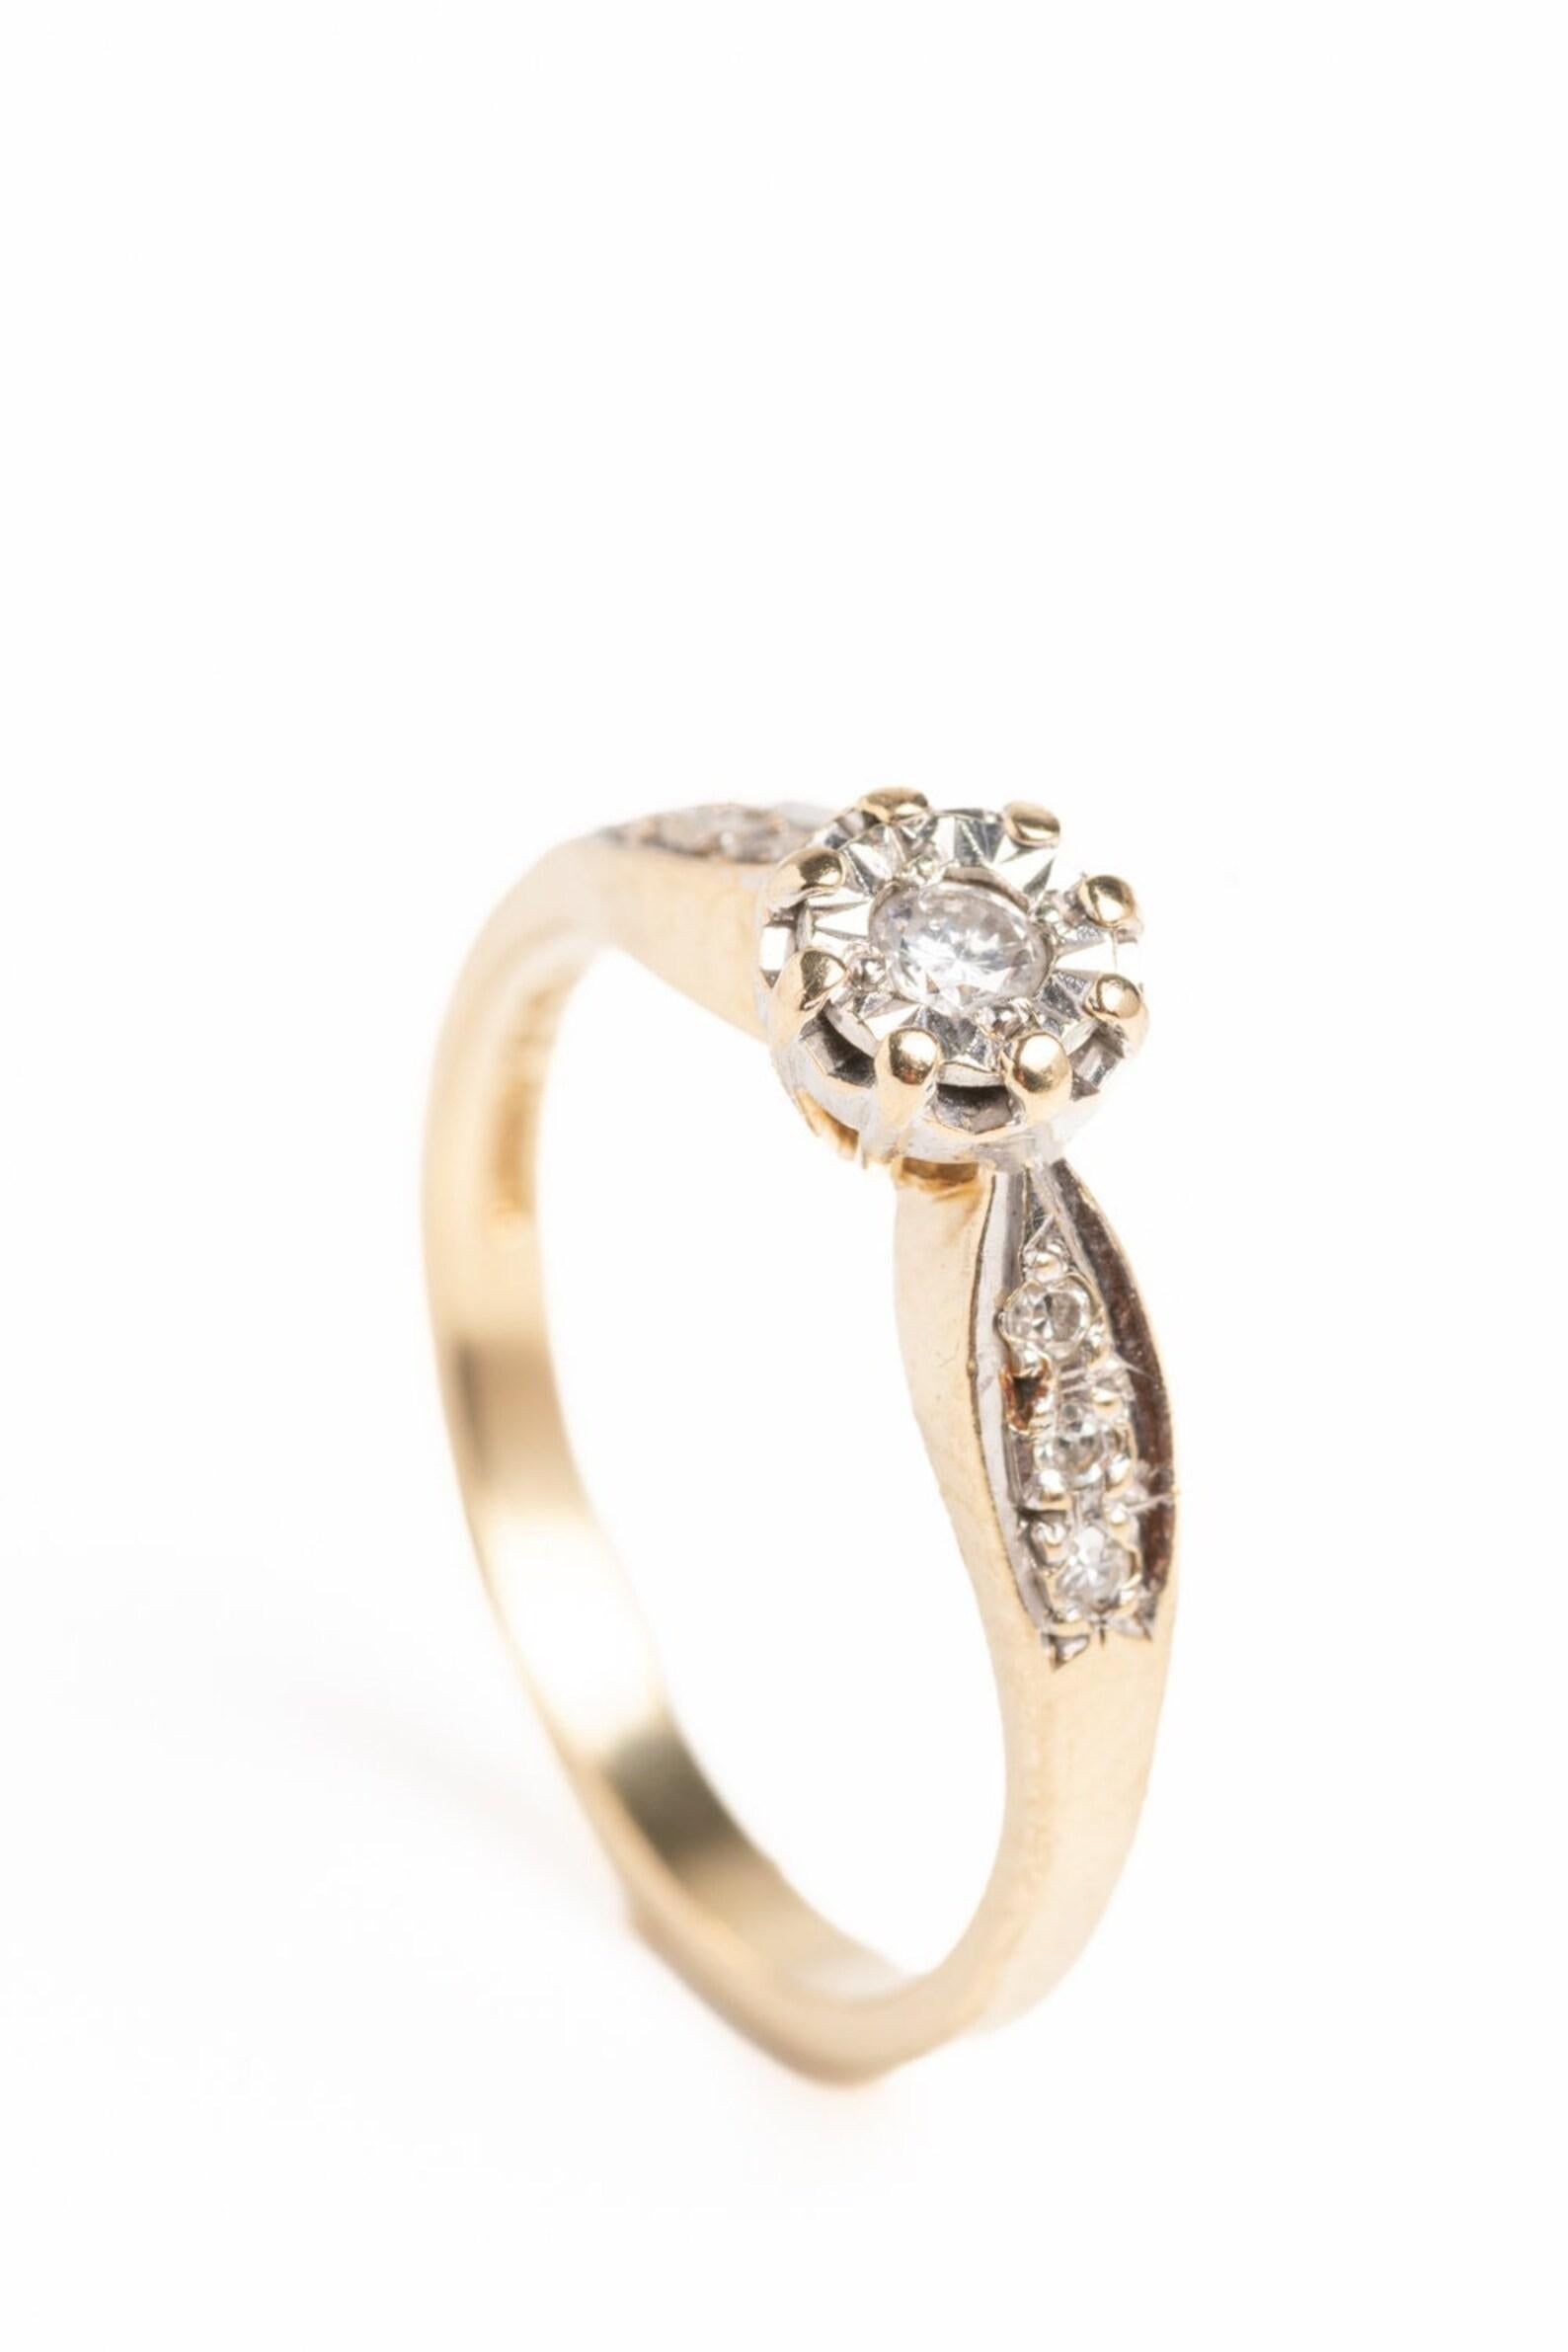 Vintage 9ct Gold Diamond Ring In Good Condition For Sale In Portland, GB